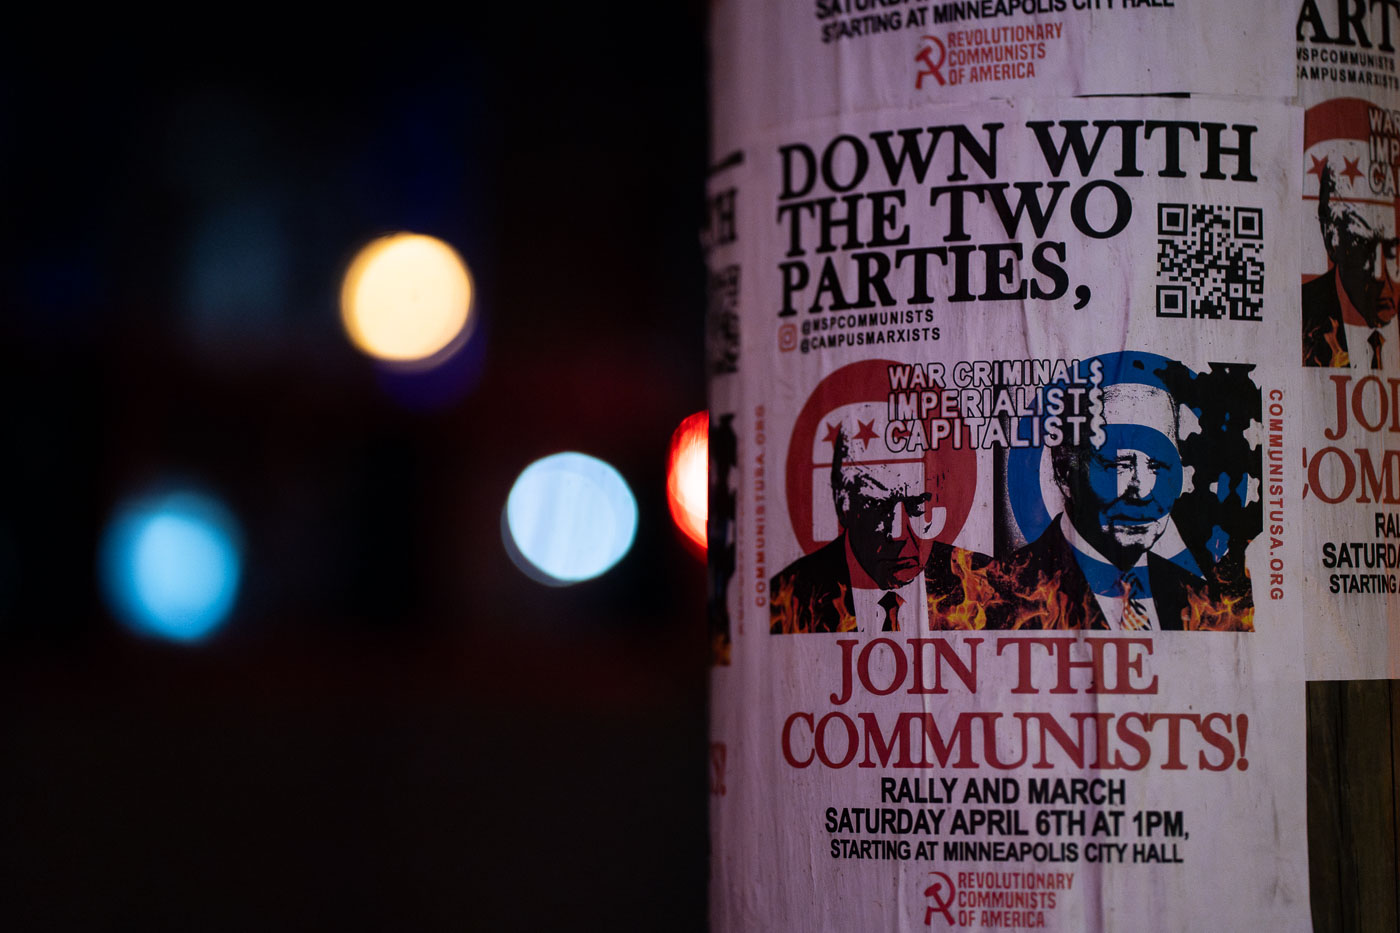 Join the communists flyer